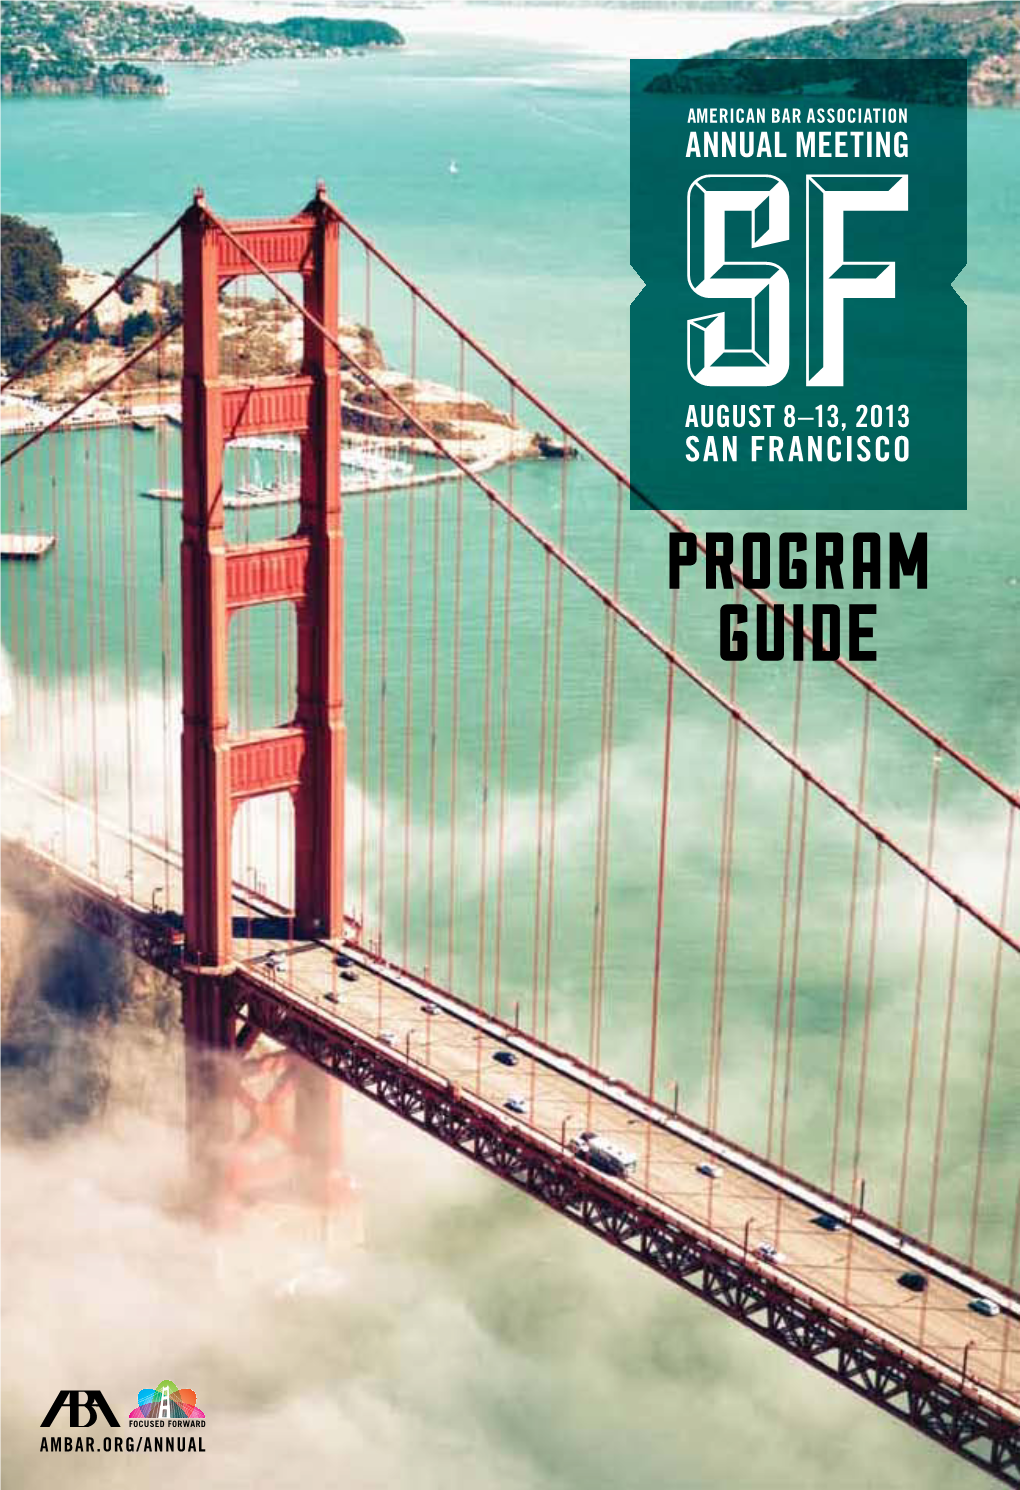 ABA 2013 SF Annual Meeting Program Expo Guide